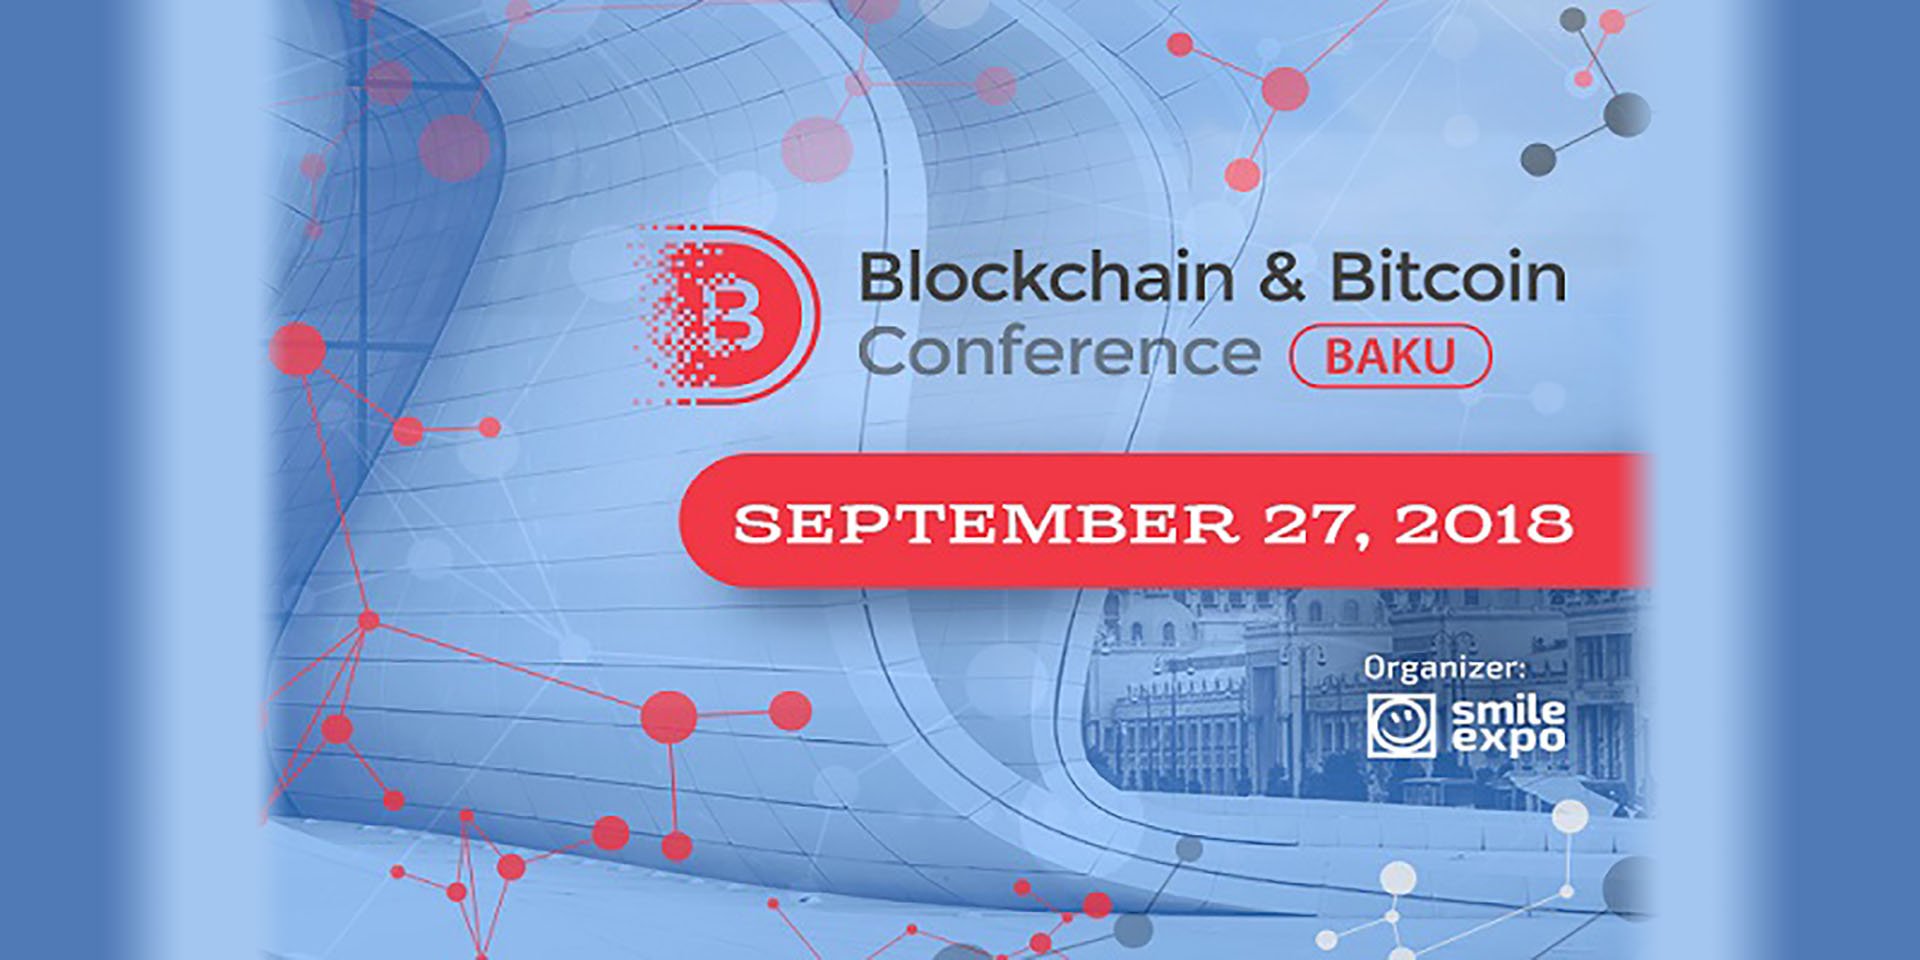 Will Azerbaijan Become a New Cryptocurrency Harbor? Find out the Answer at Blockchain & Bitcoin Conference Baku